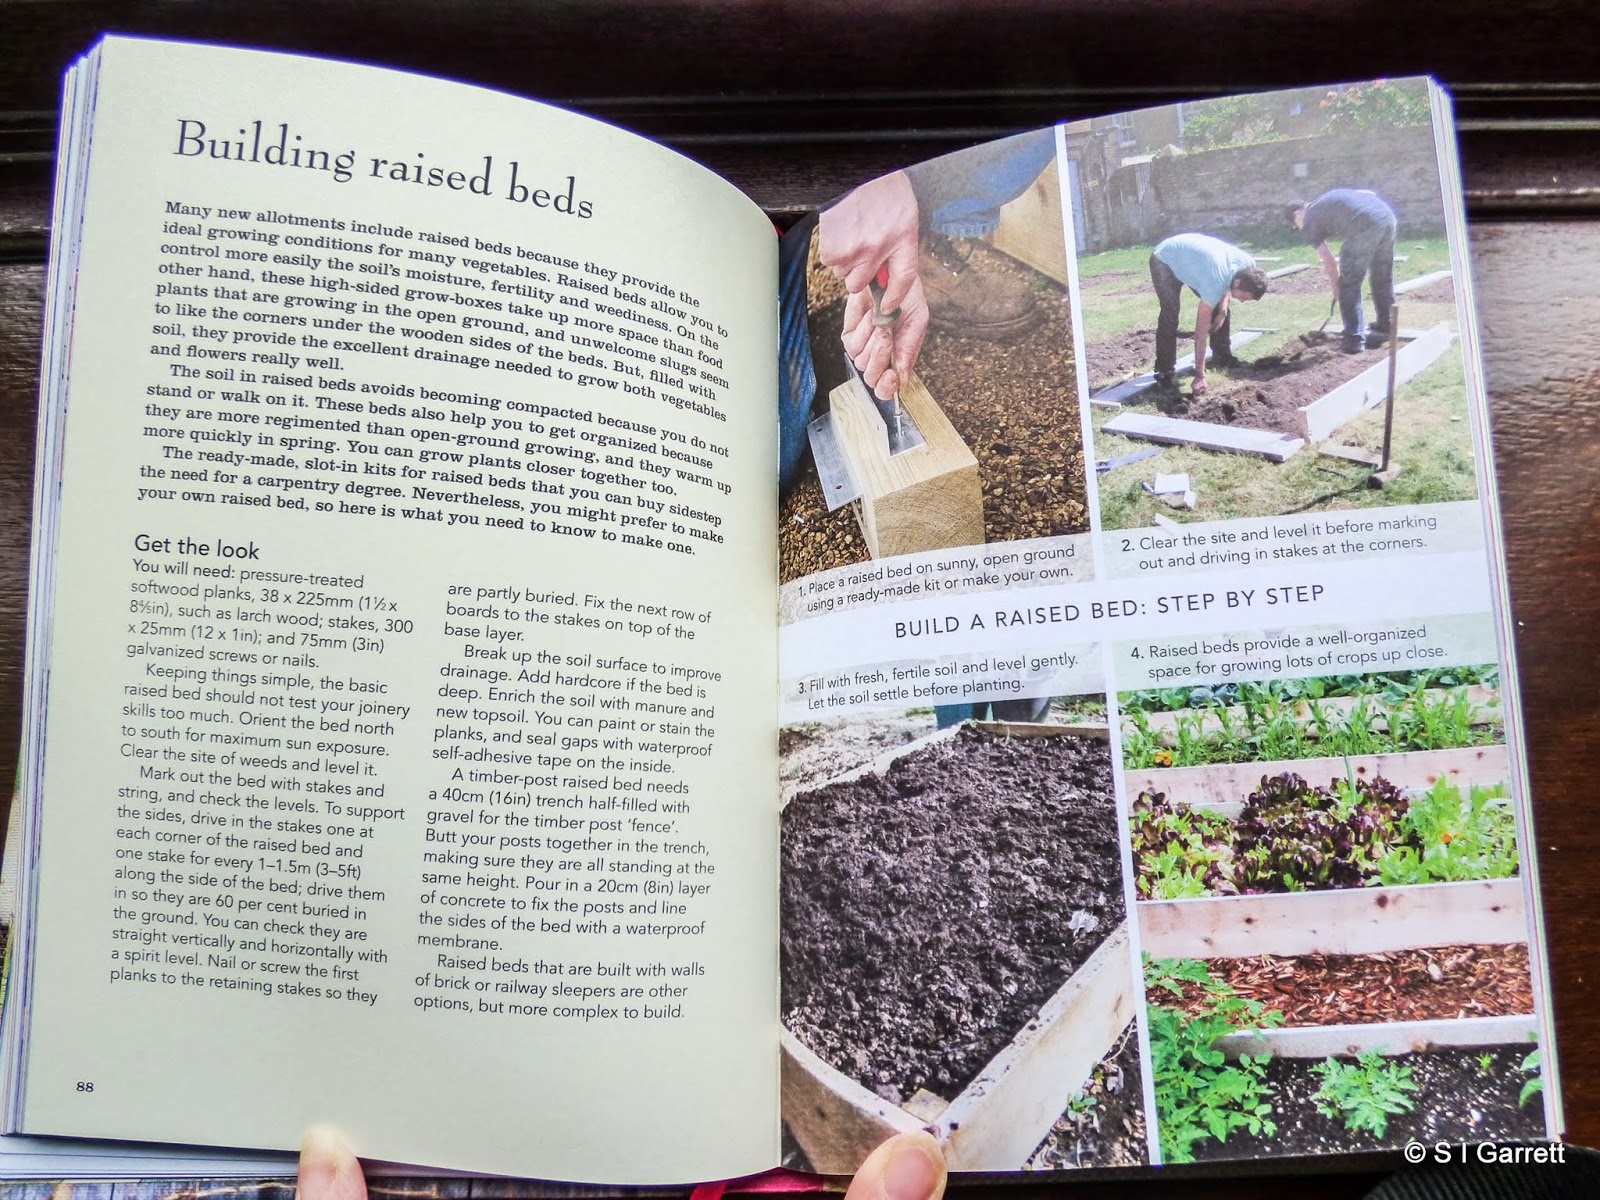 Our Plot at Green Lane Allotments: Book Review - The Allotment Planner